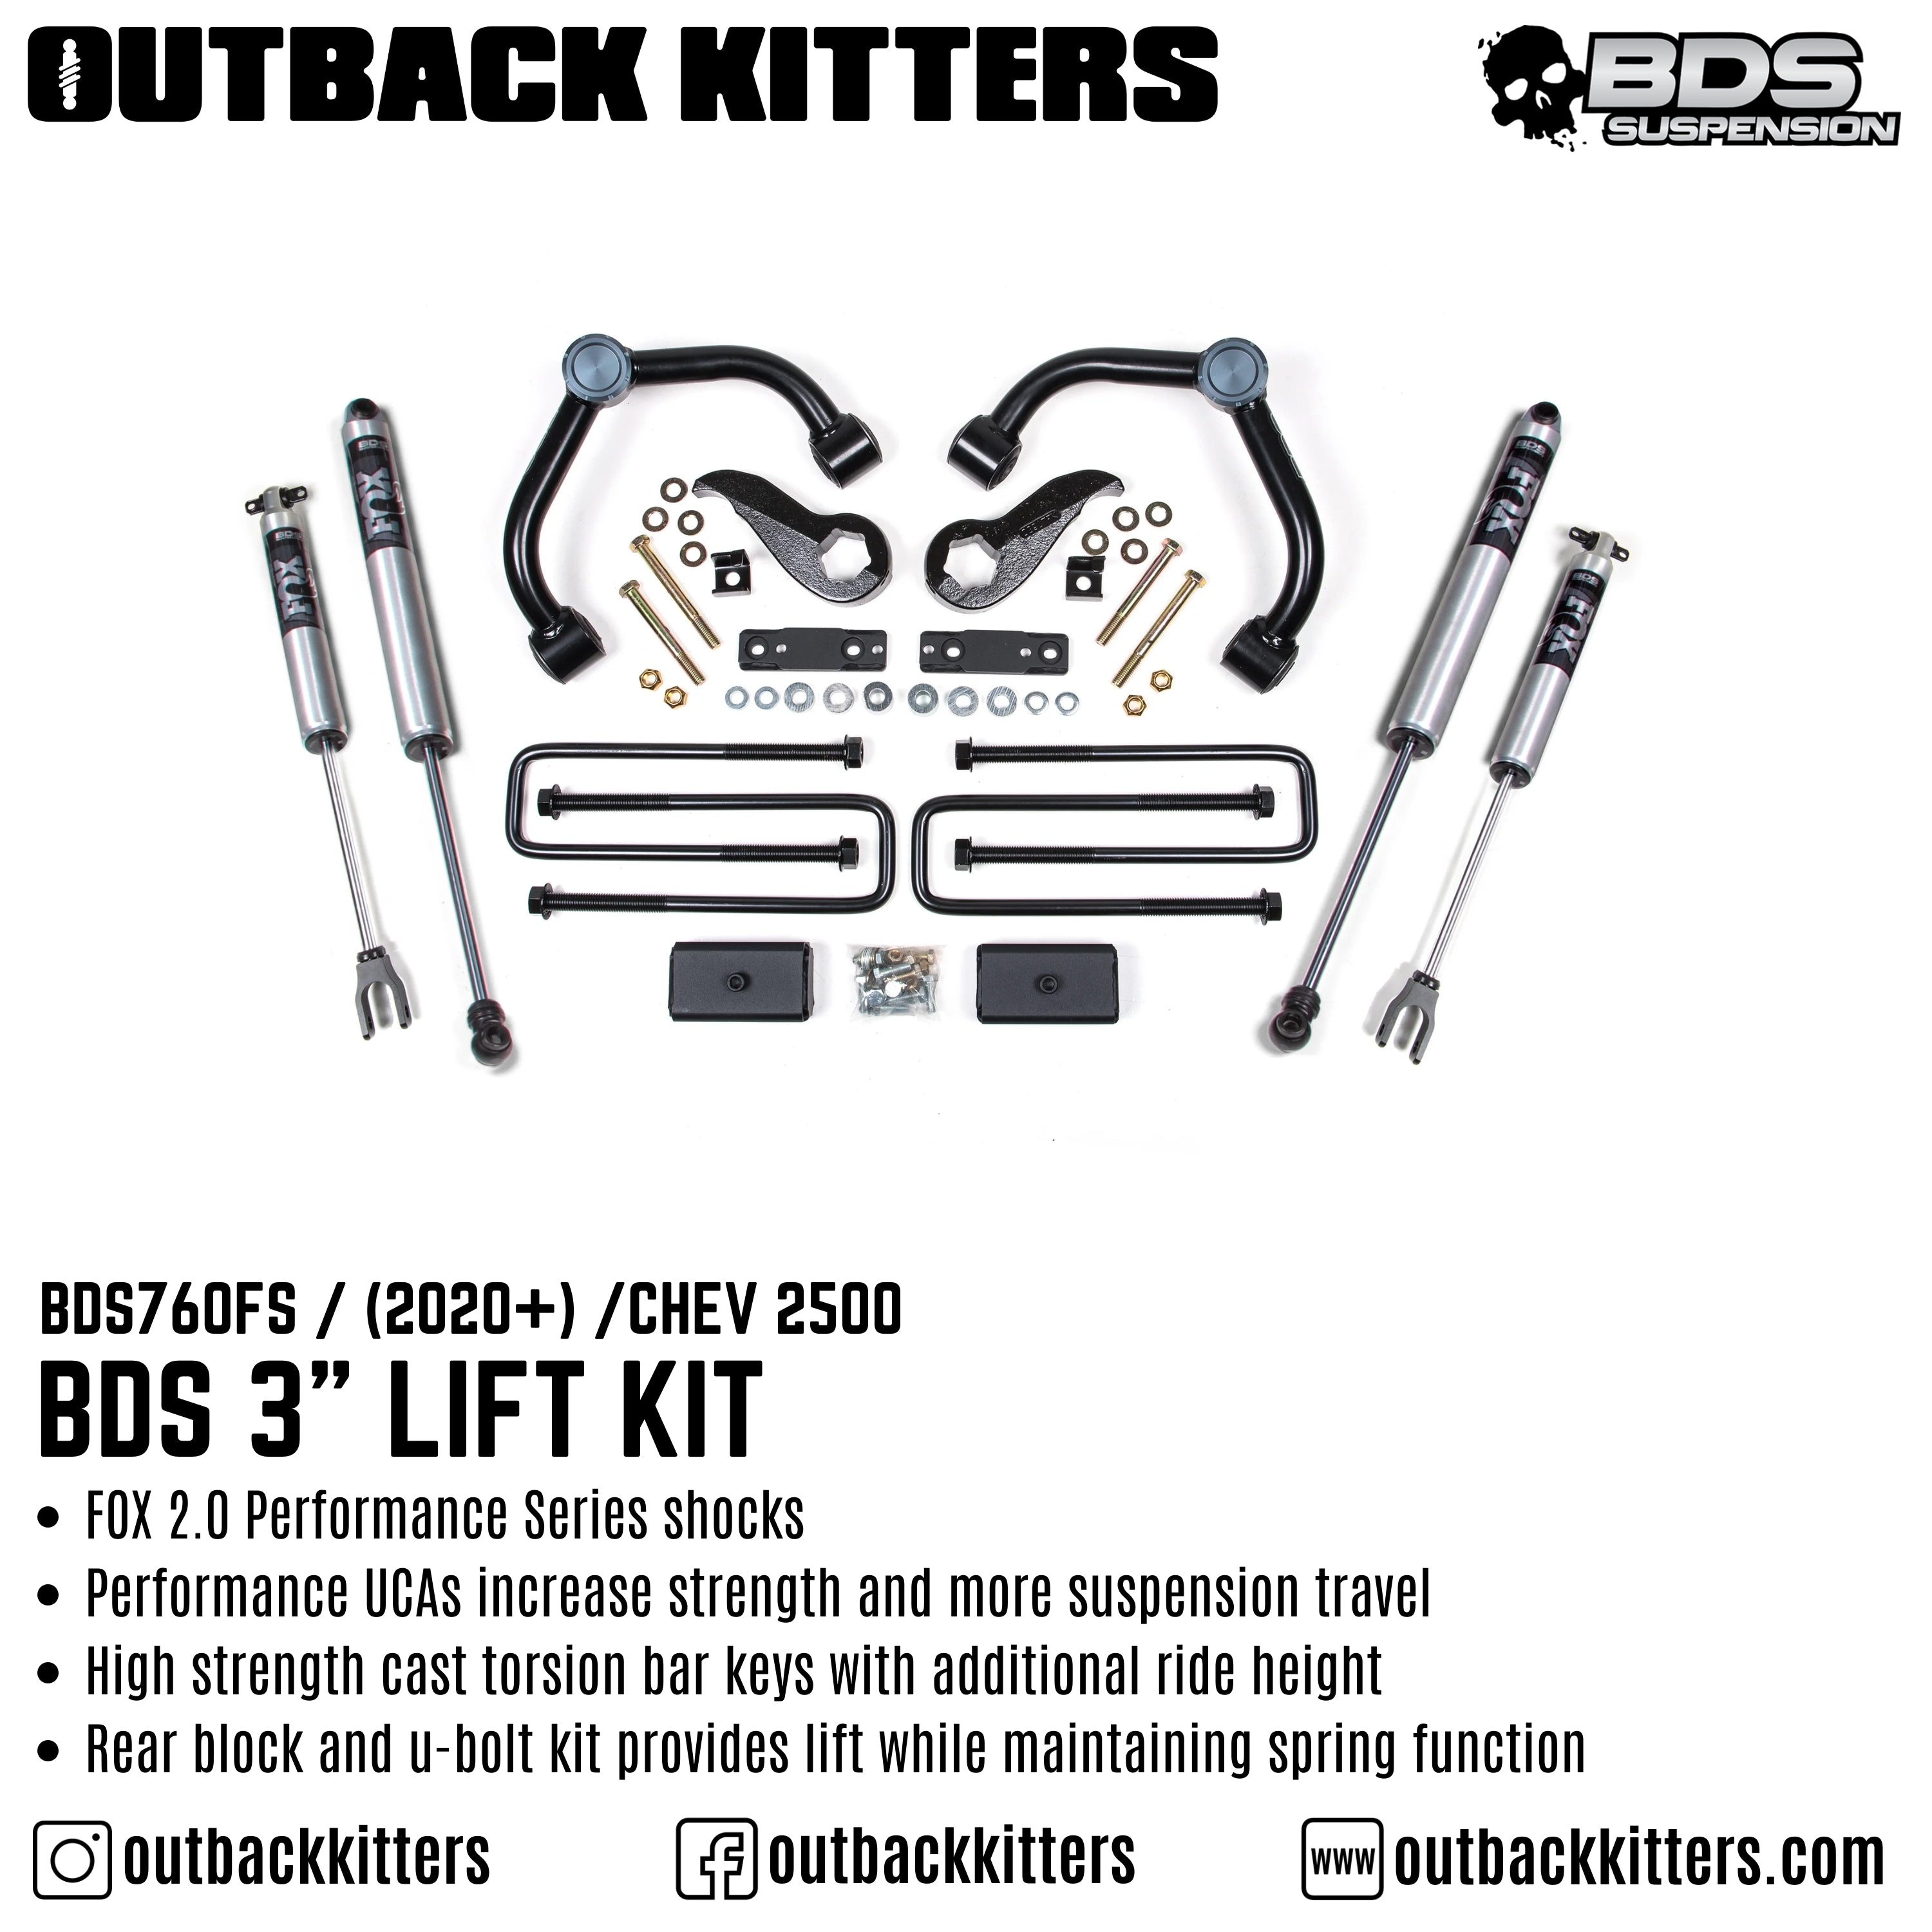 BDS Suspension 3" Lift Kit for 2020+ Chevy Silverado 2500 - Outback Kitters